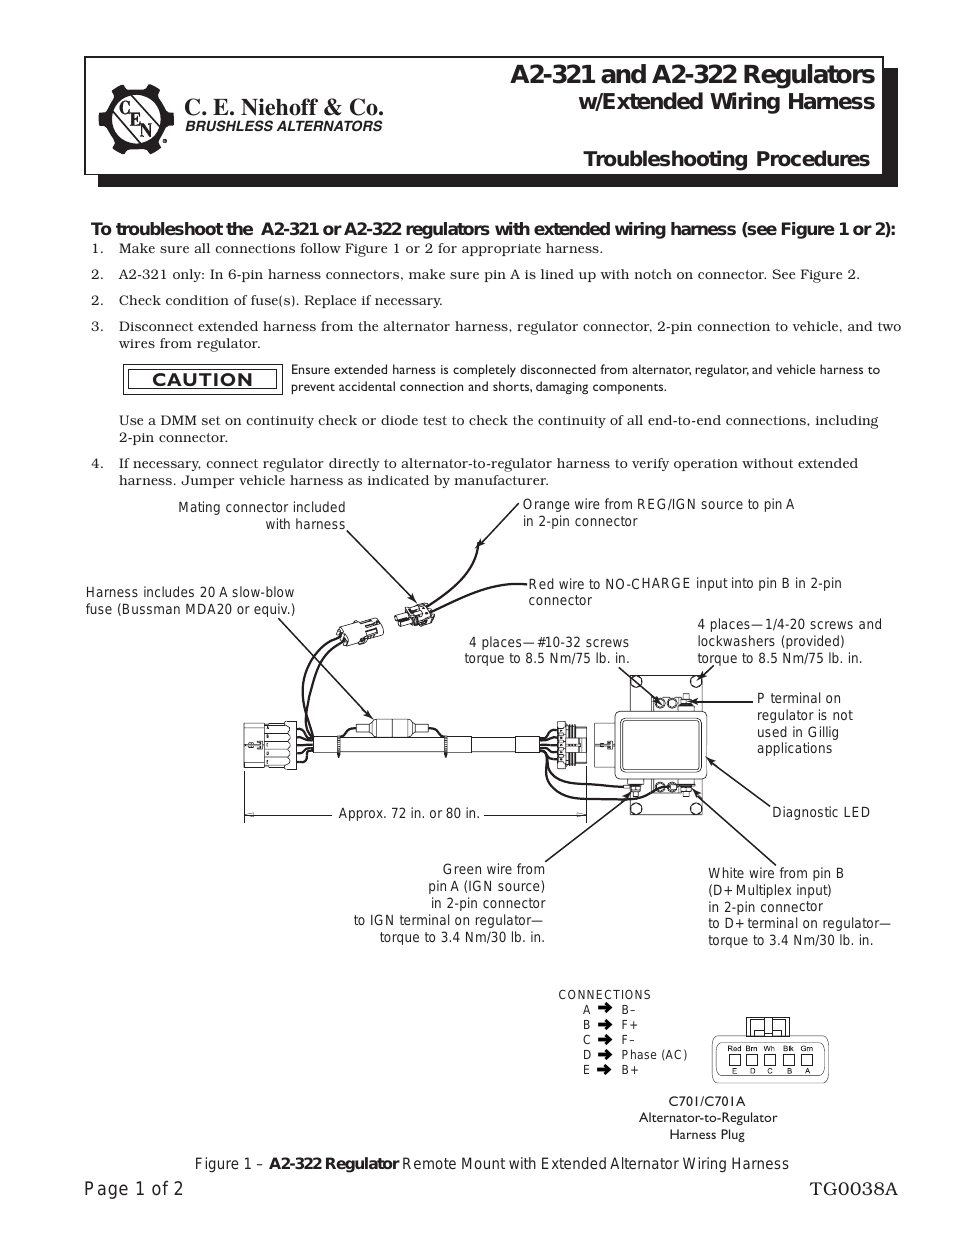 A2-321/A2-322 Regulator with Extended Harness Troubleshooting Guides